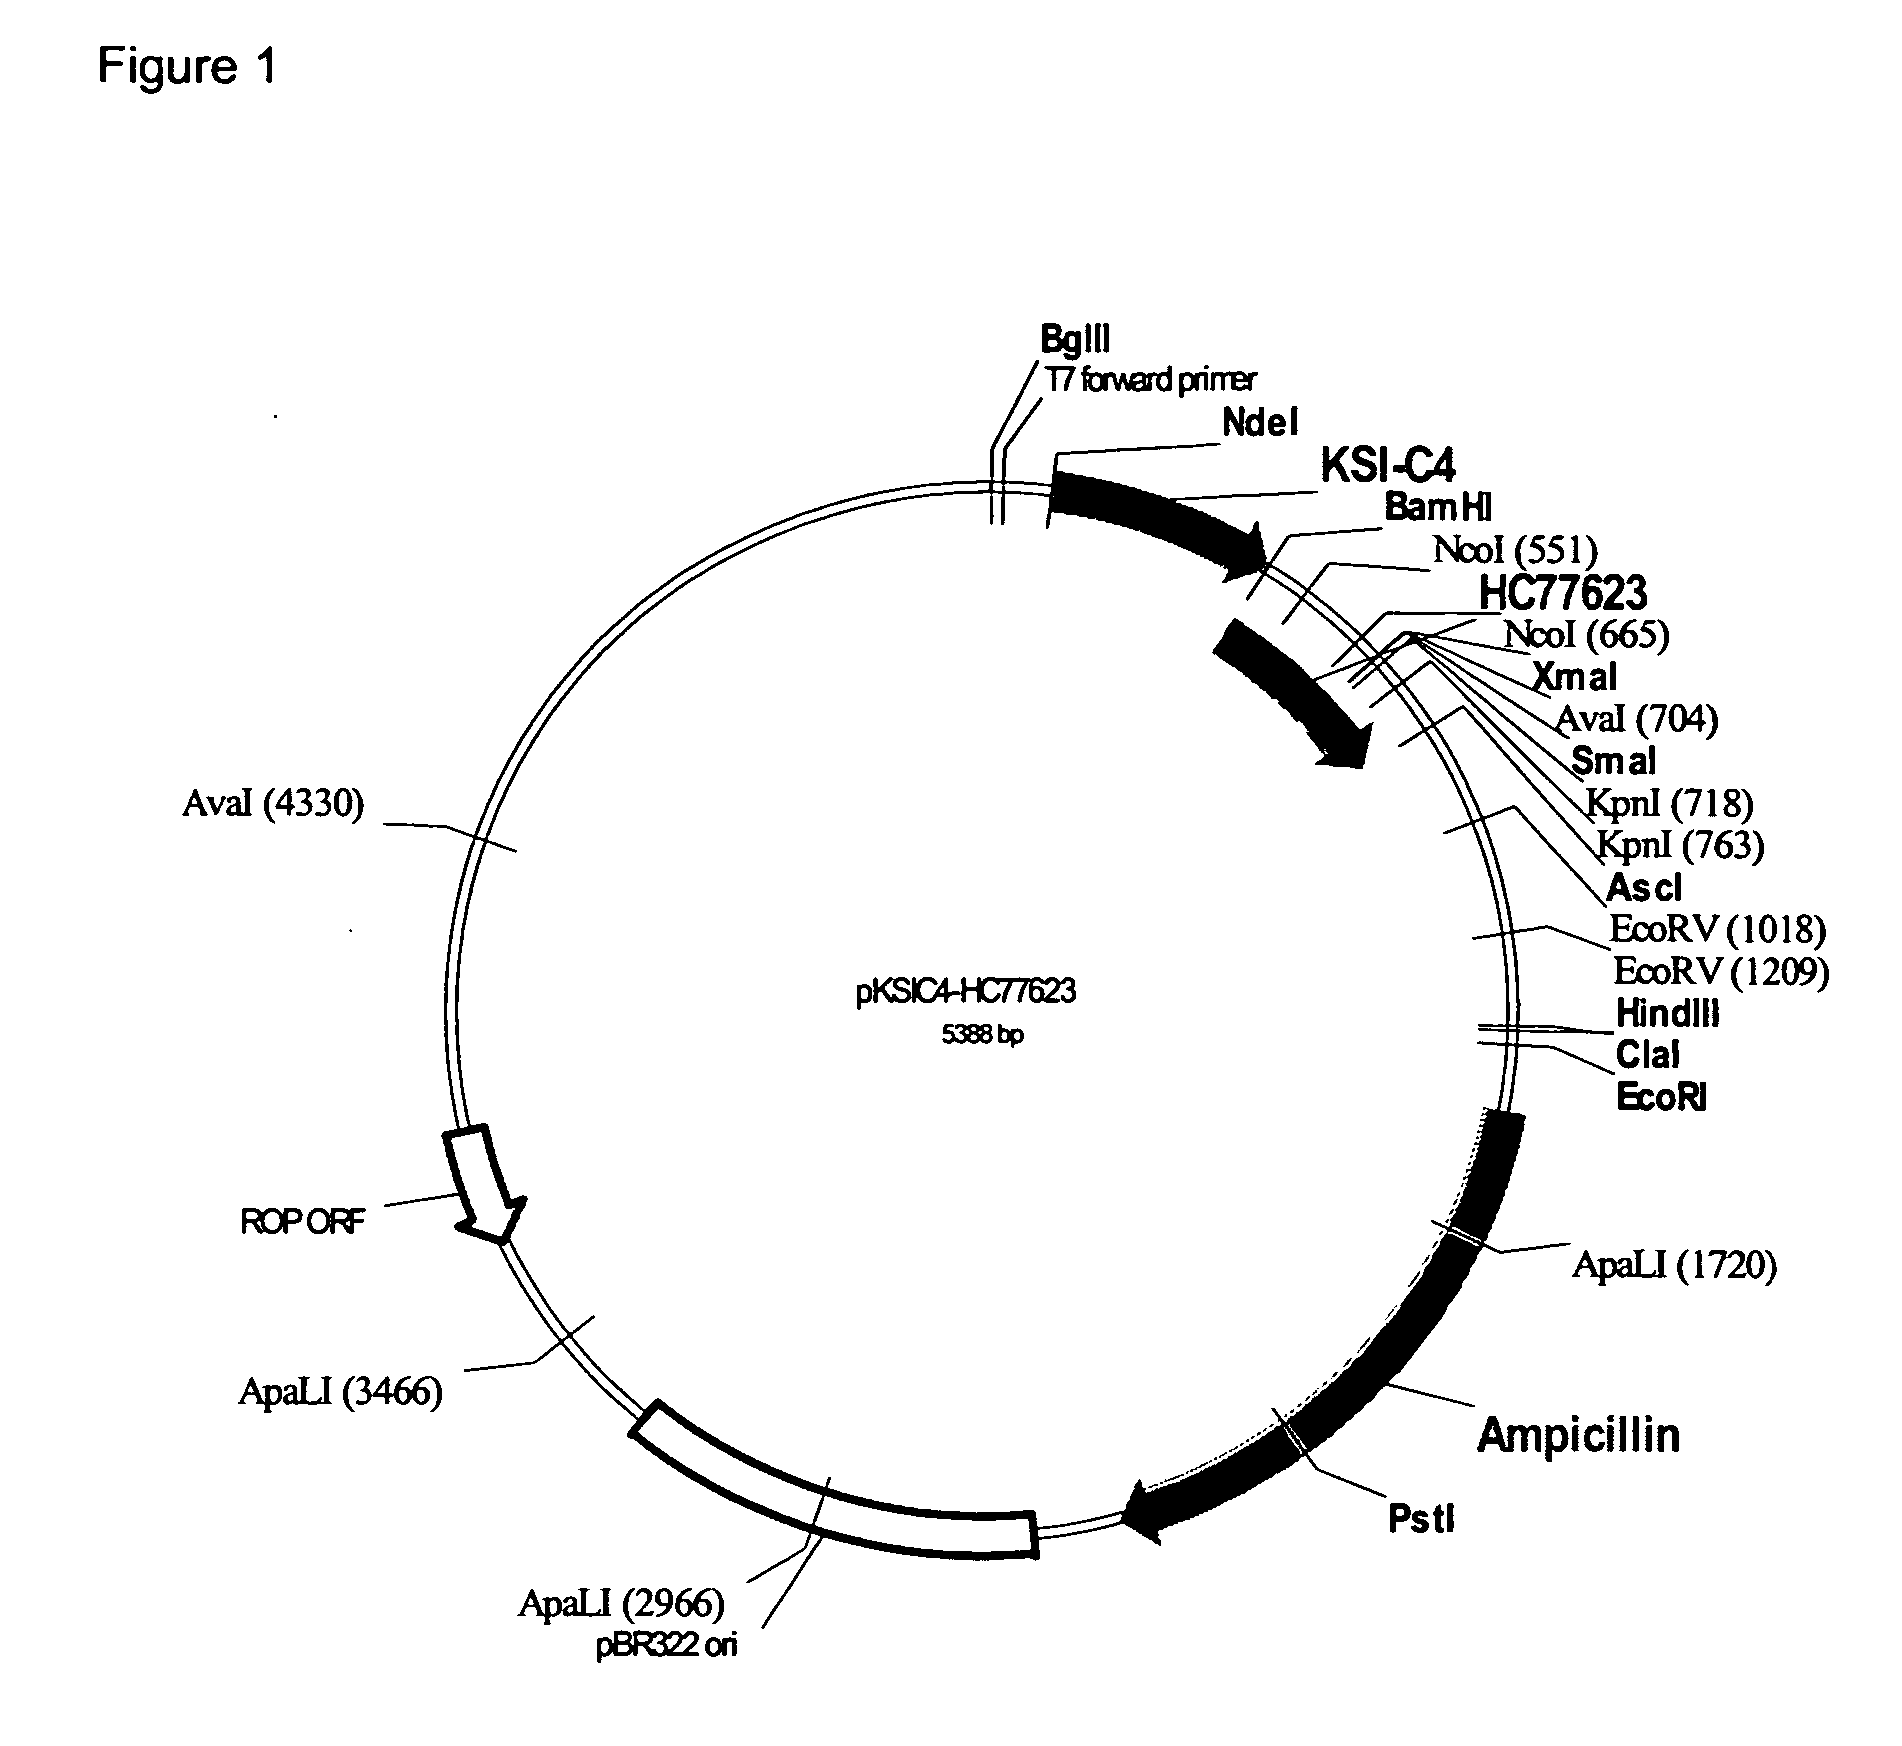 Method for enhancing the effect of particulate benefit agents